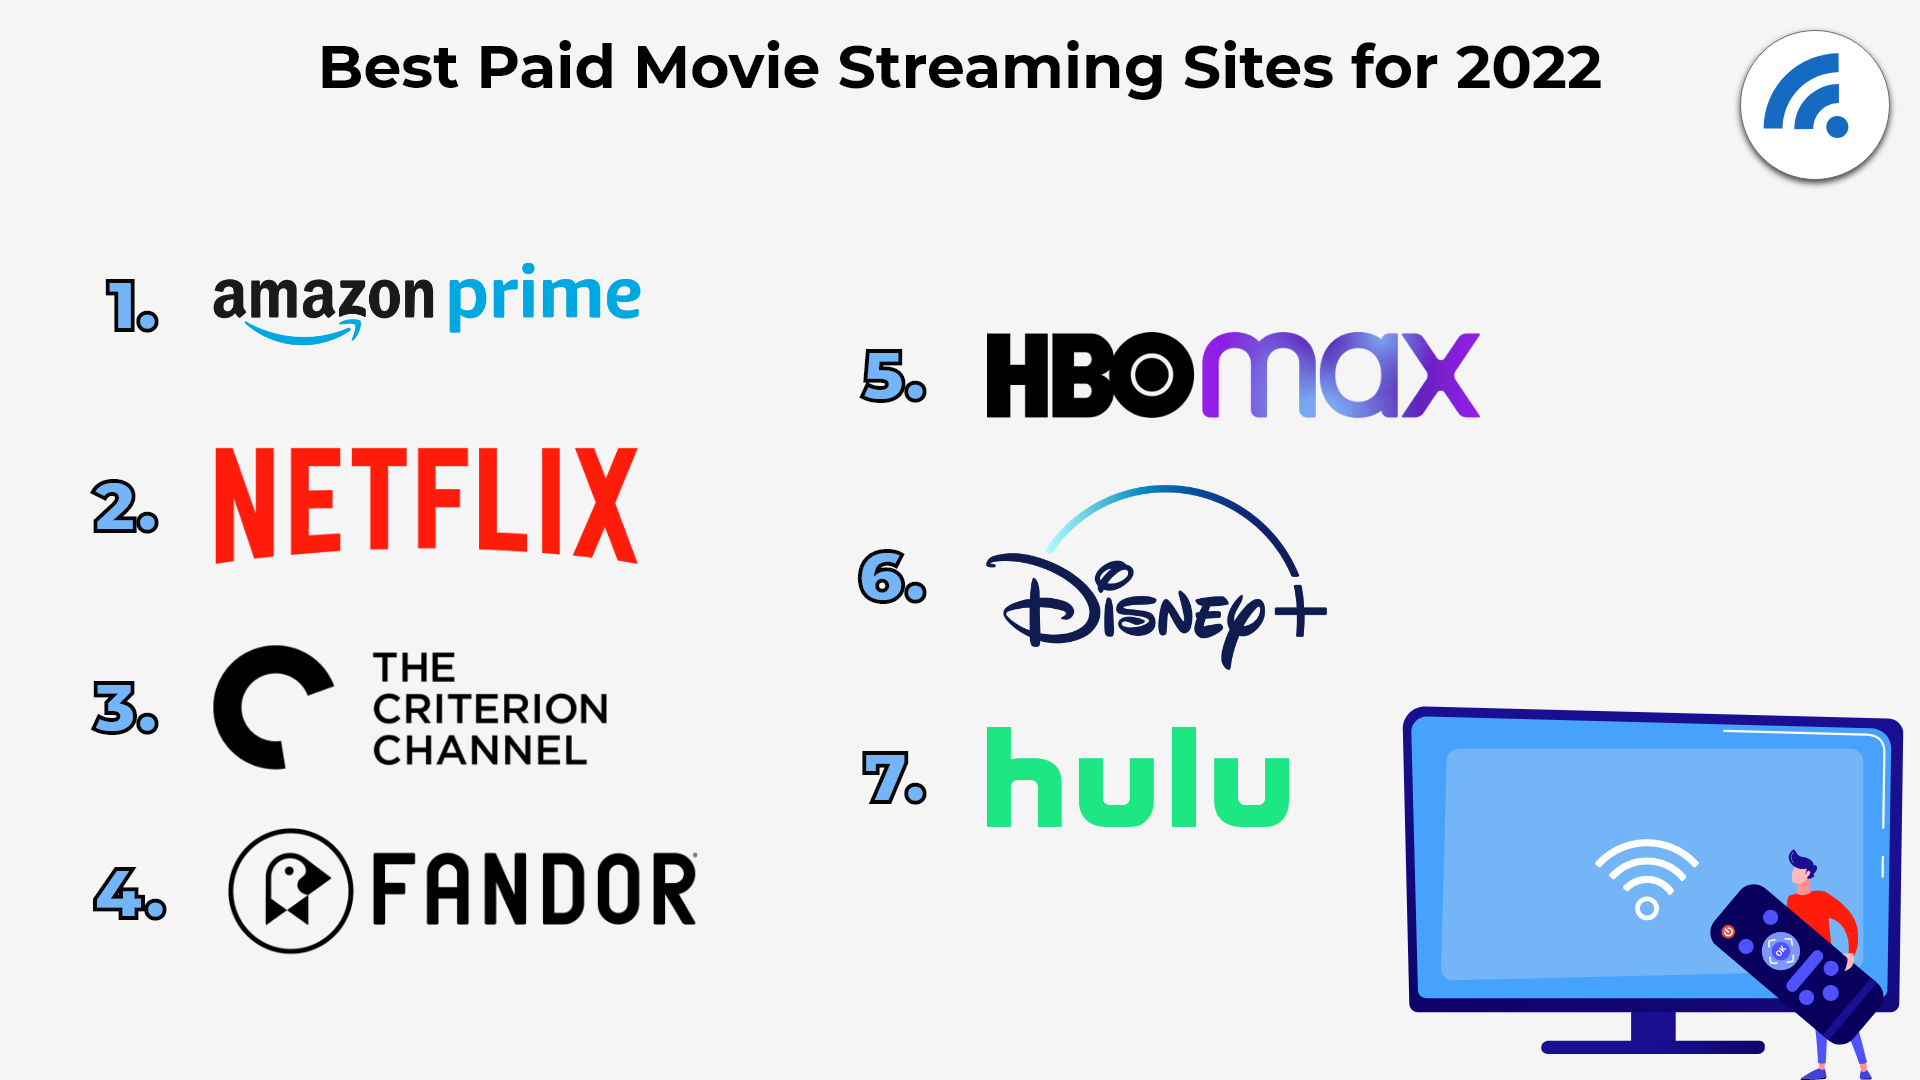 The Best Movie Streaming Sites for 2022